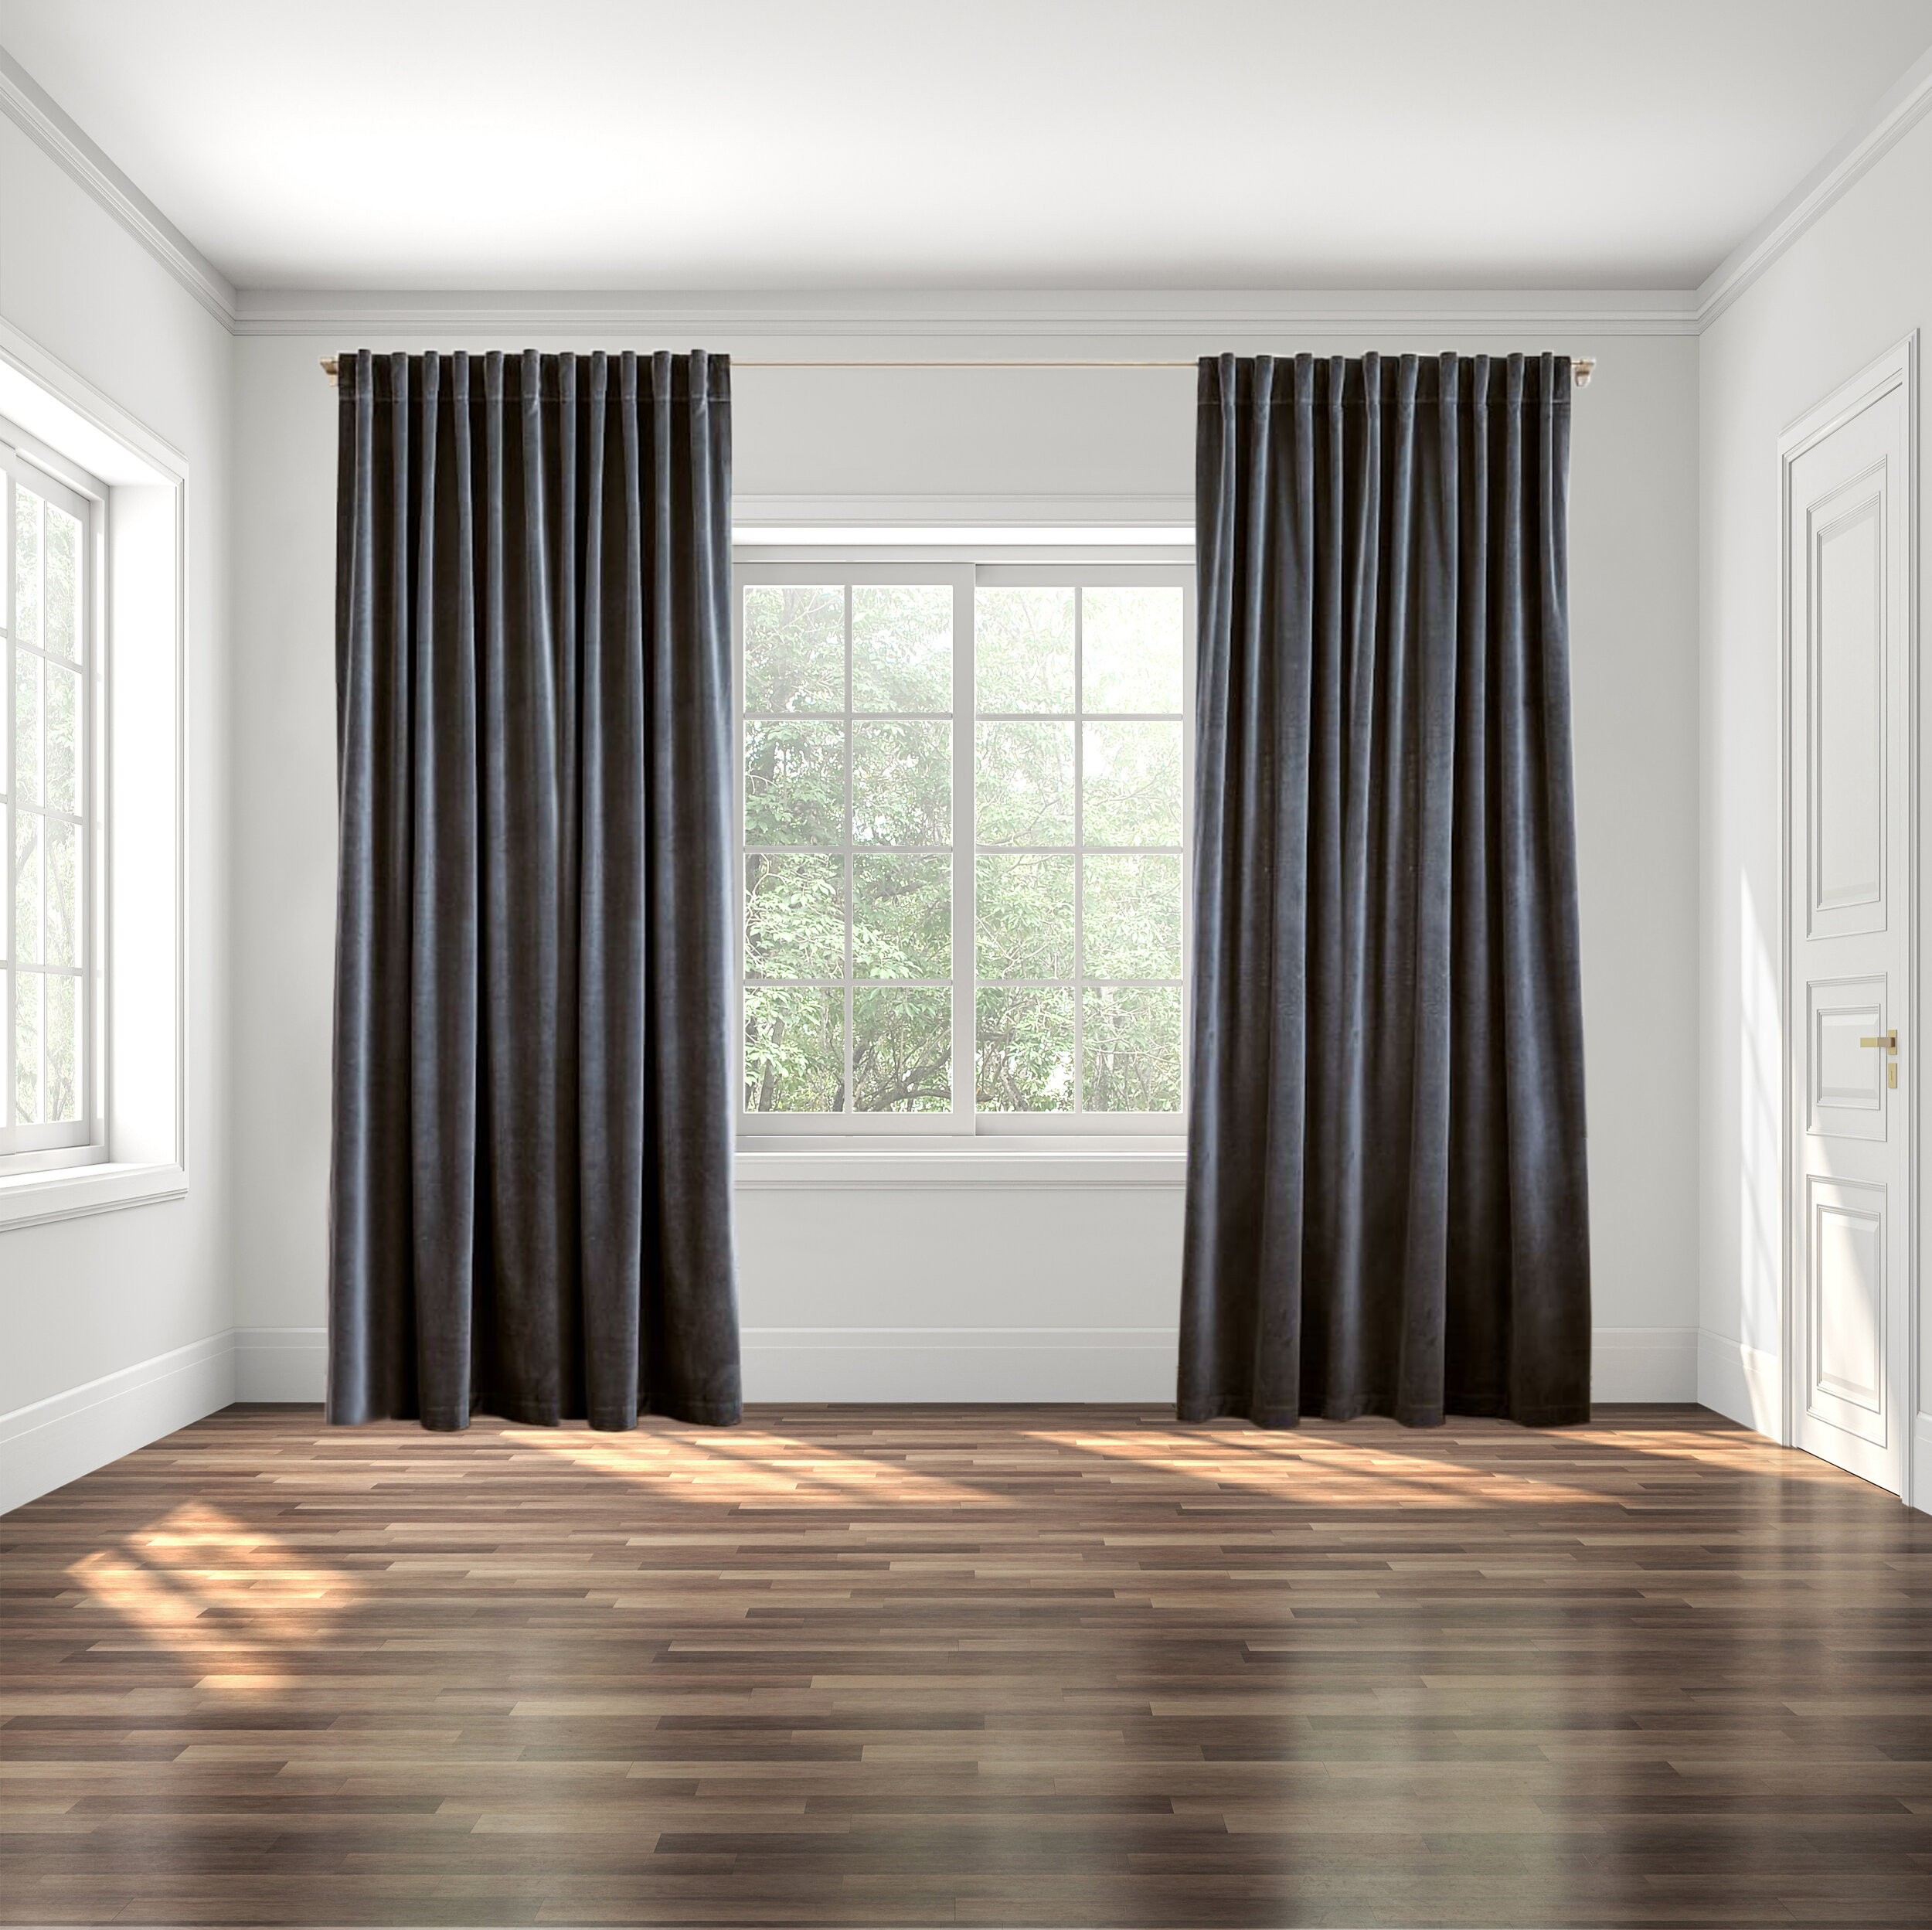 STOP Making Wall Holes While Hanging Curtains & Drapes : 4 Steps